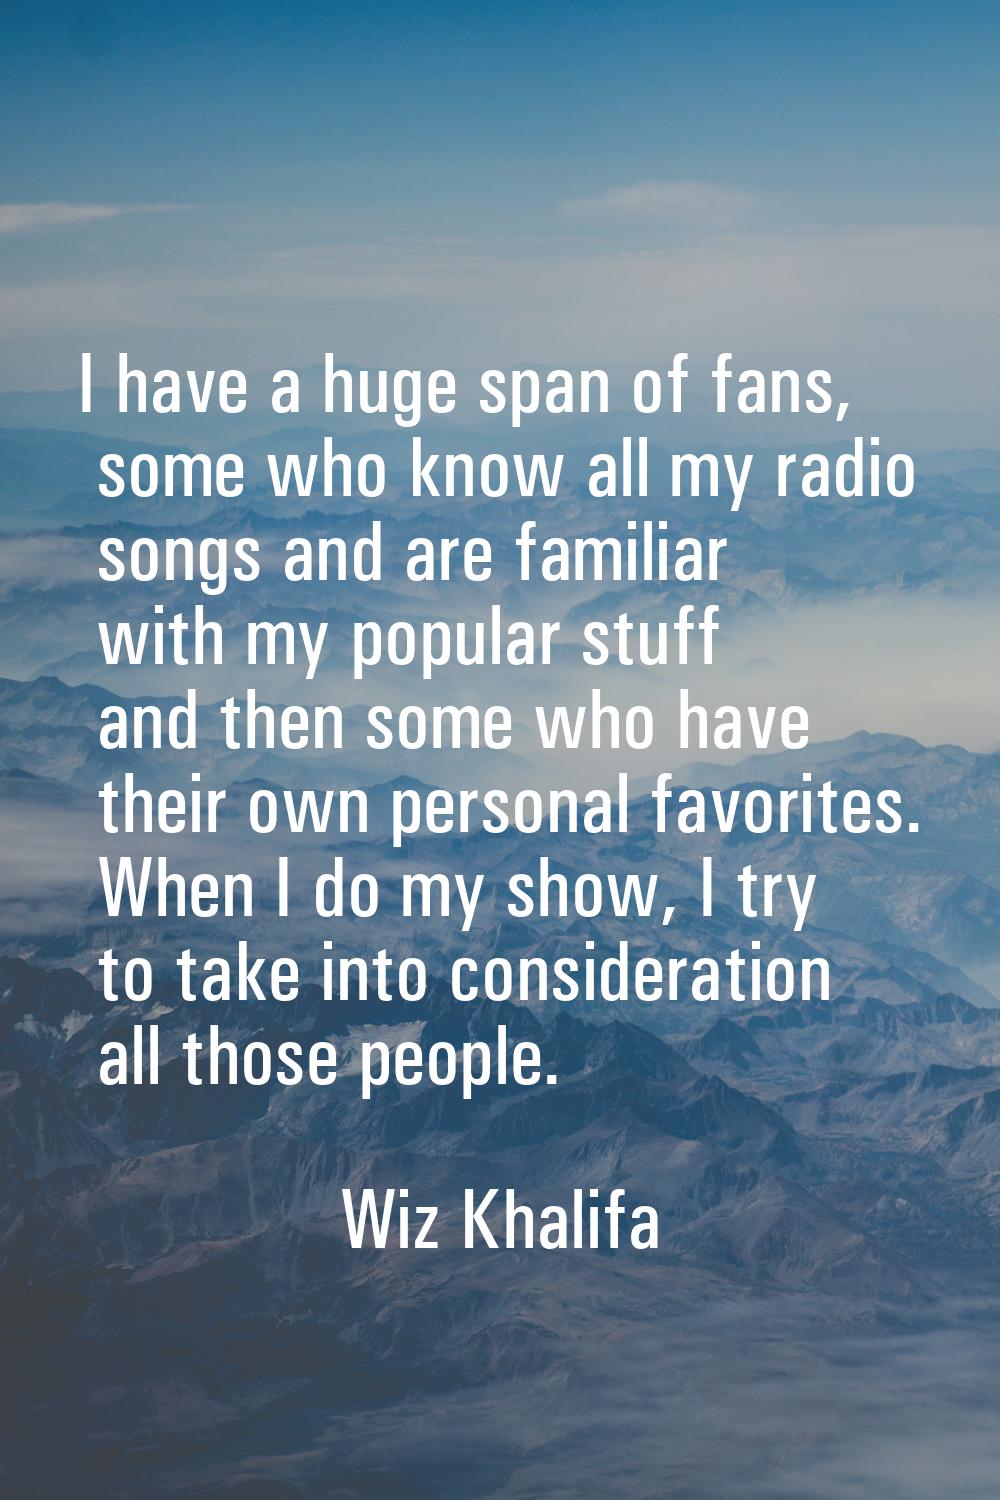 I have a huge span of fans, some who know all my radio songs and are familiar with my popular stuff